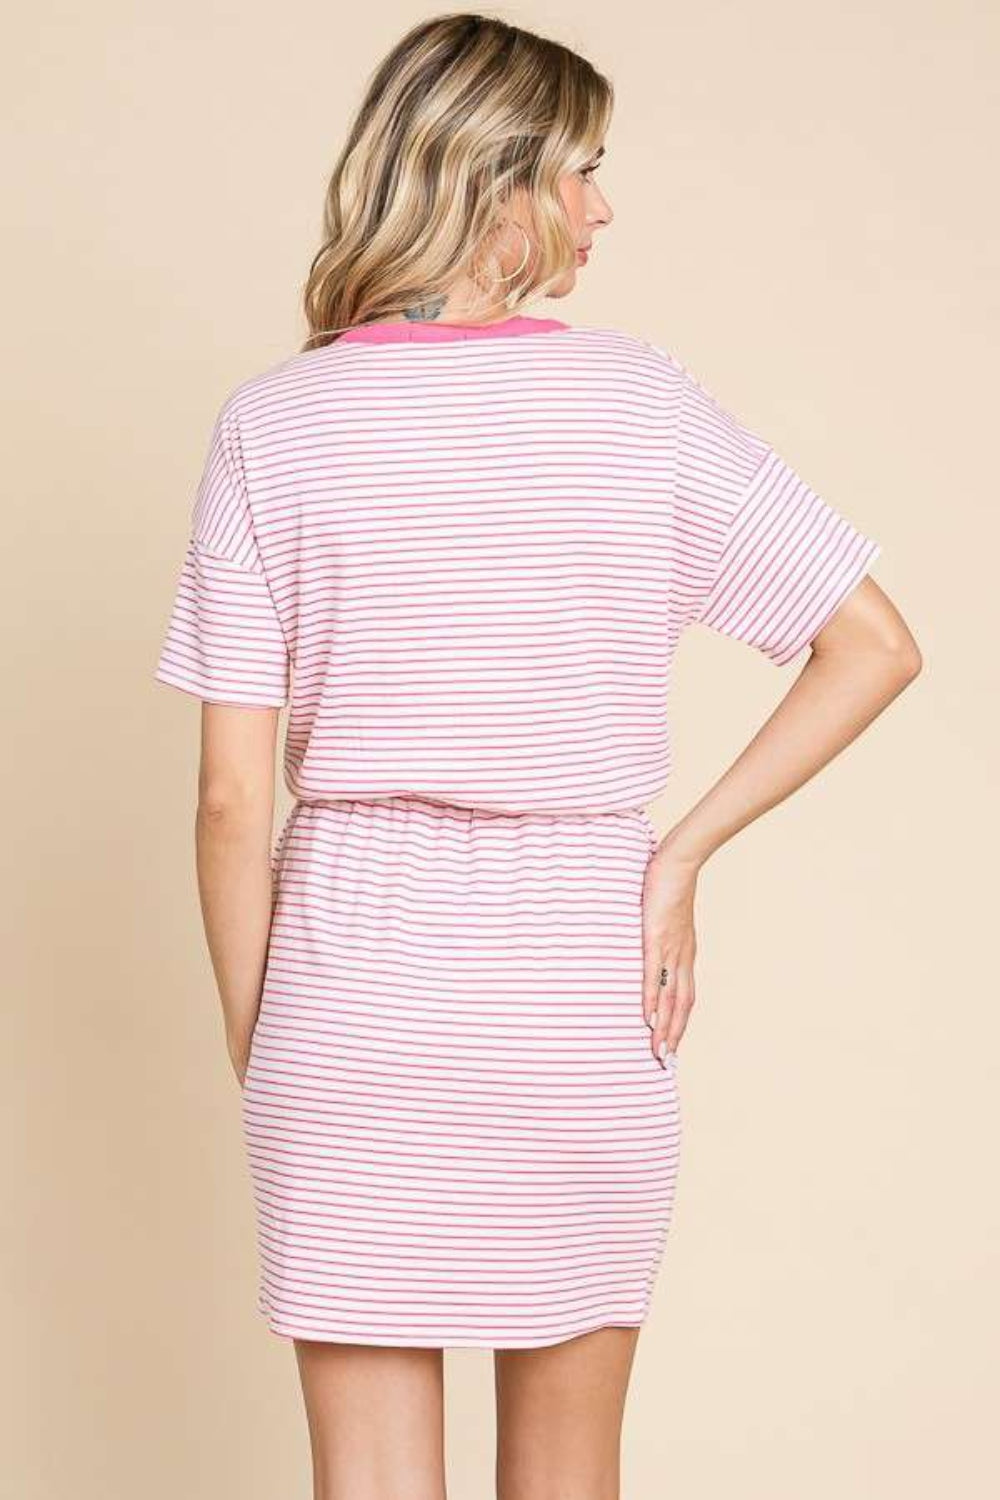 STUNNLY  Culture Code Full Size Striped Short Sleeve Mini Dress with Pockets   